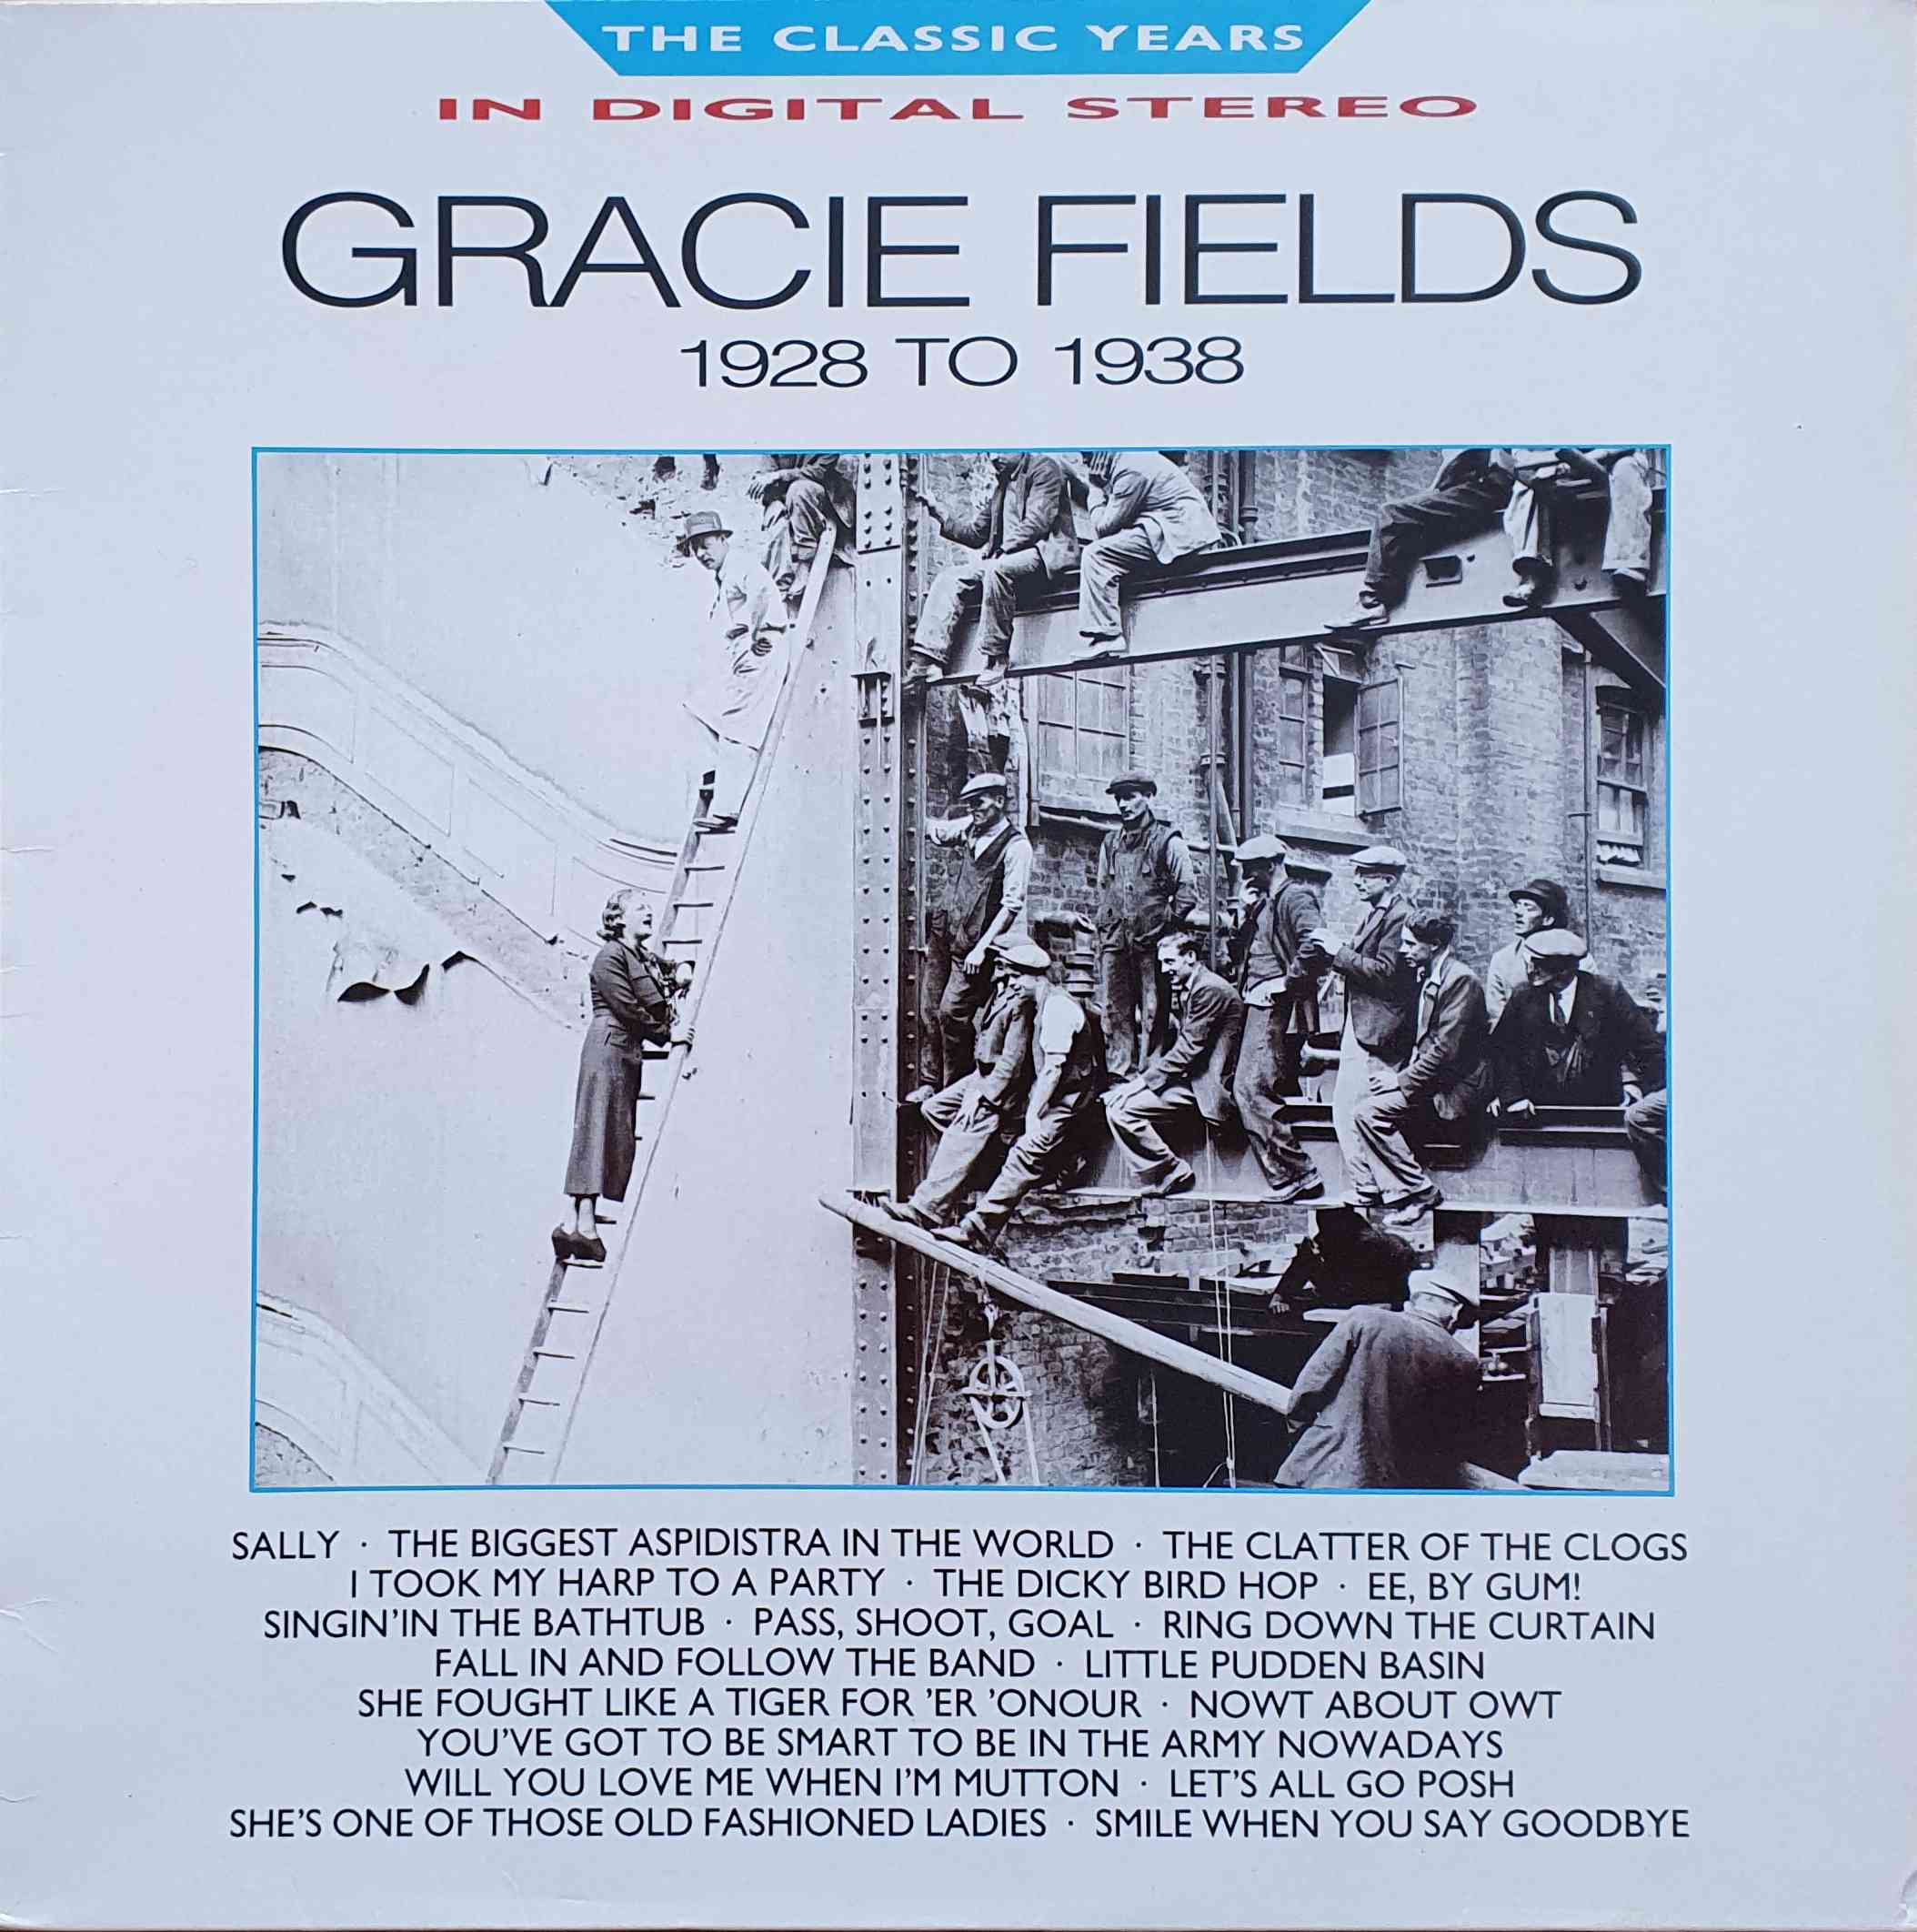 Picture of REB 690 Classic years - Gracie Fields by artist Gracie Fields from the BBC albums - Records and Tapes library